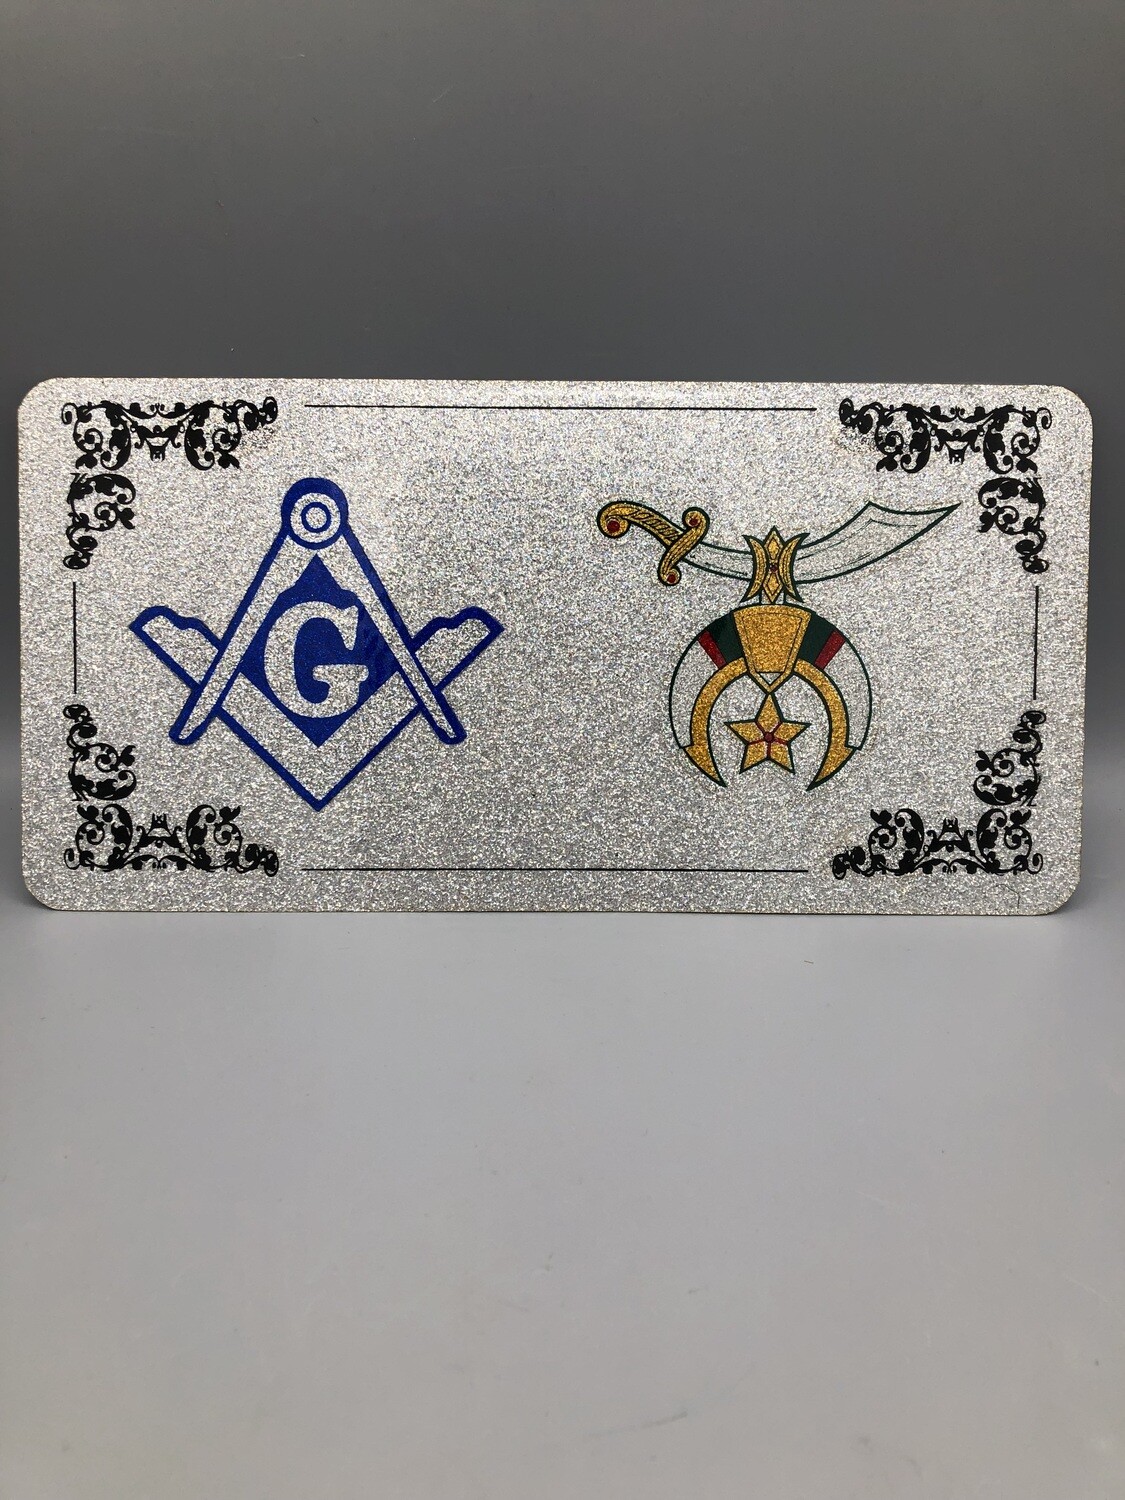 Freemason Shriner License Plate with cover